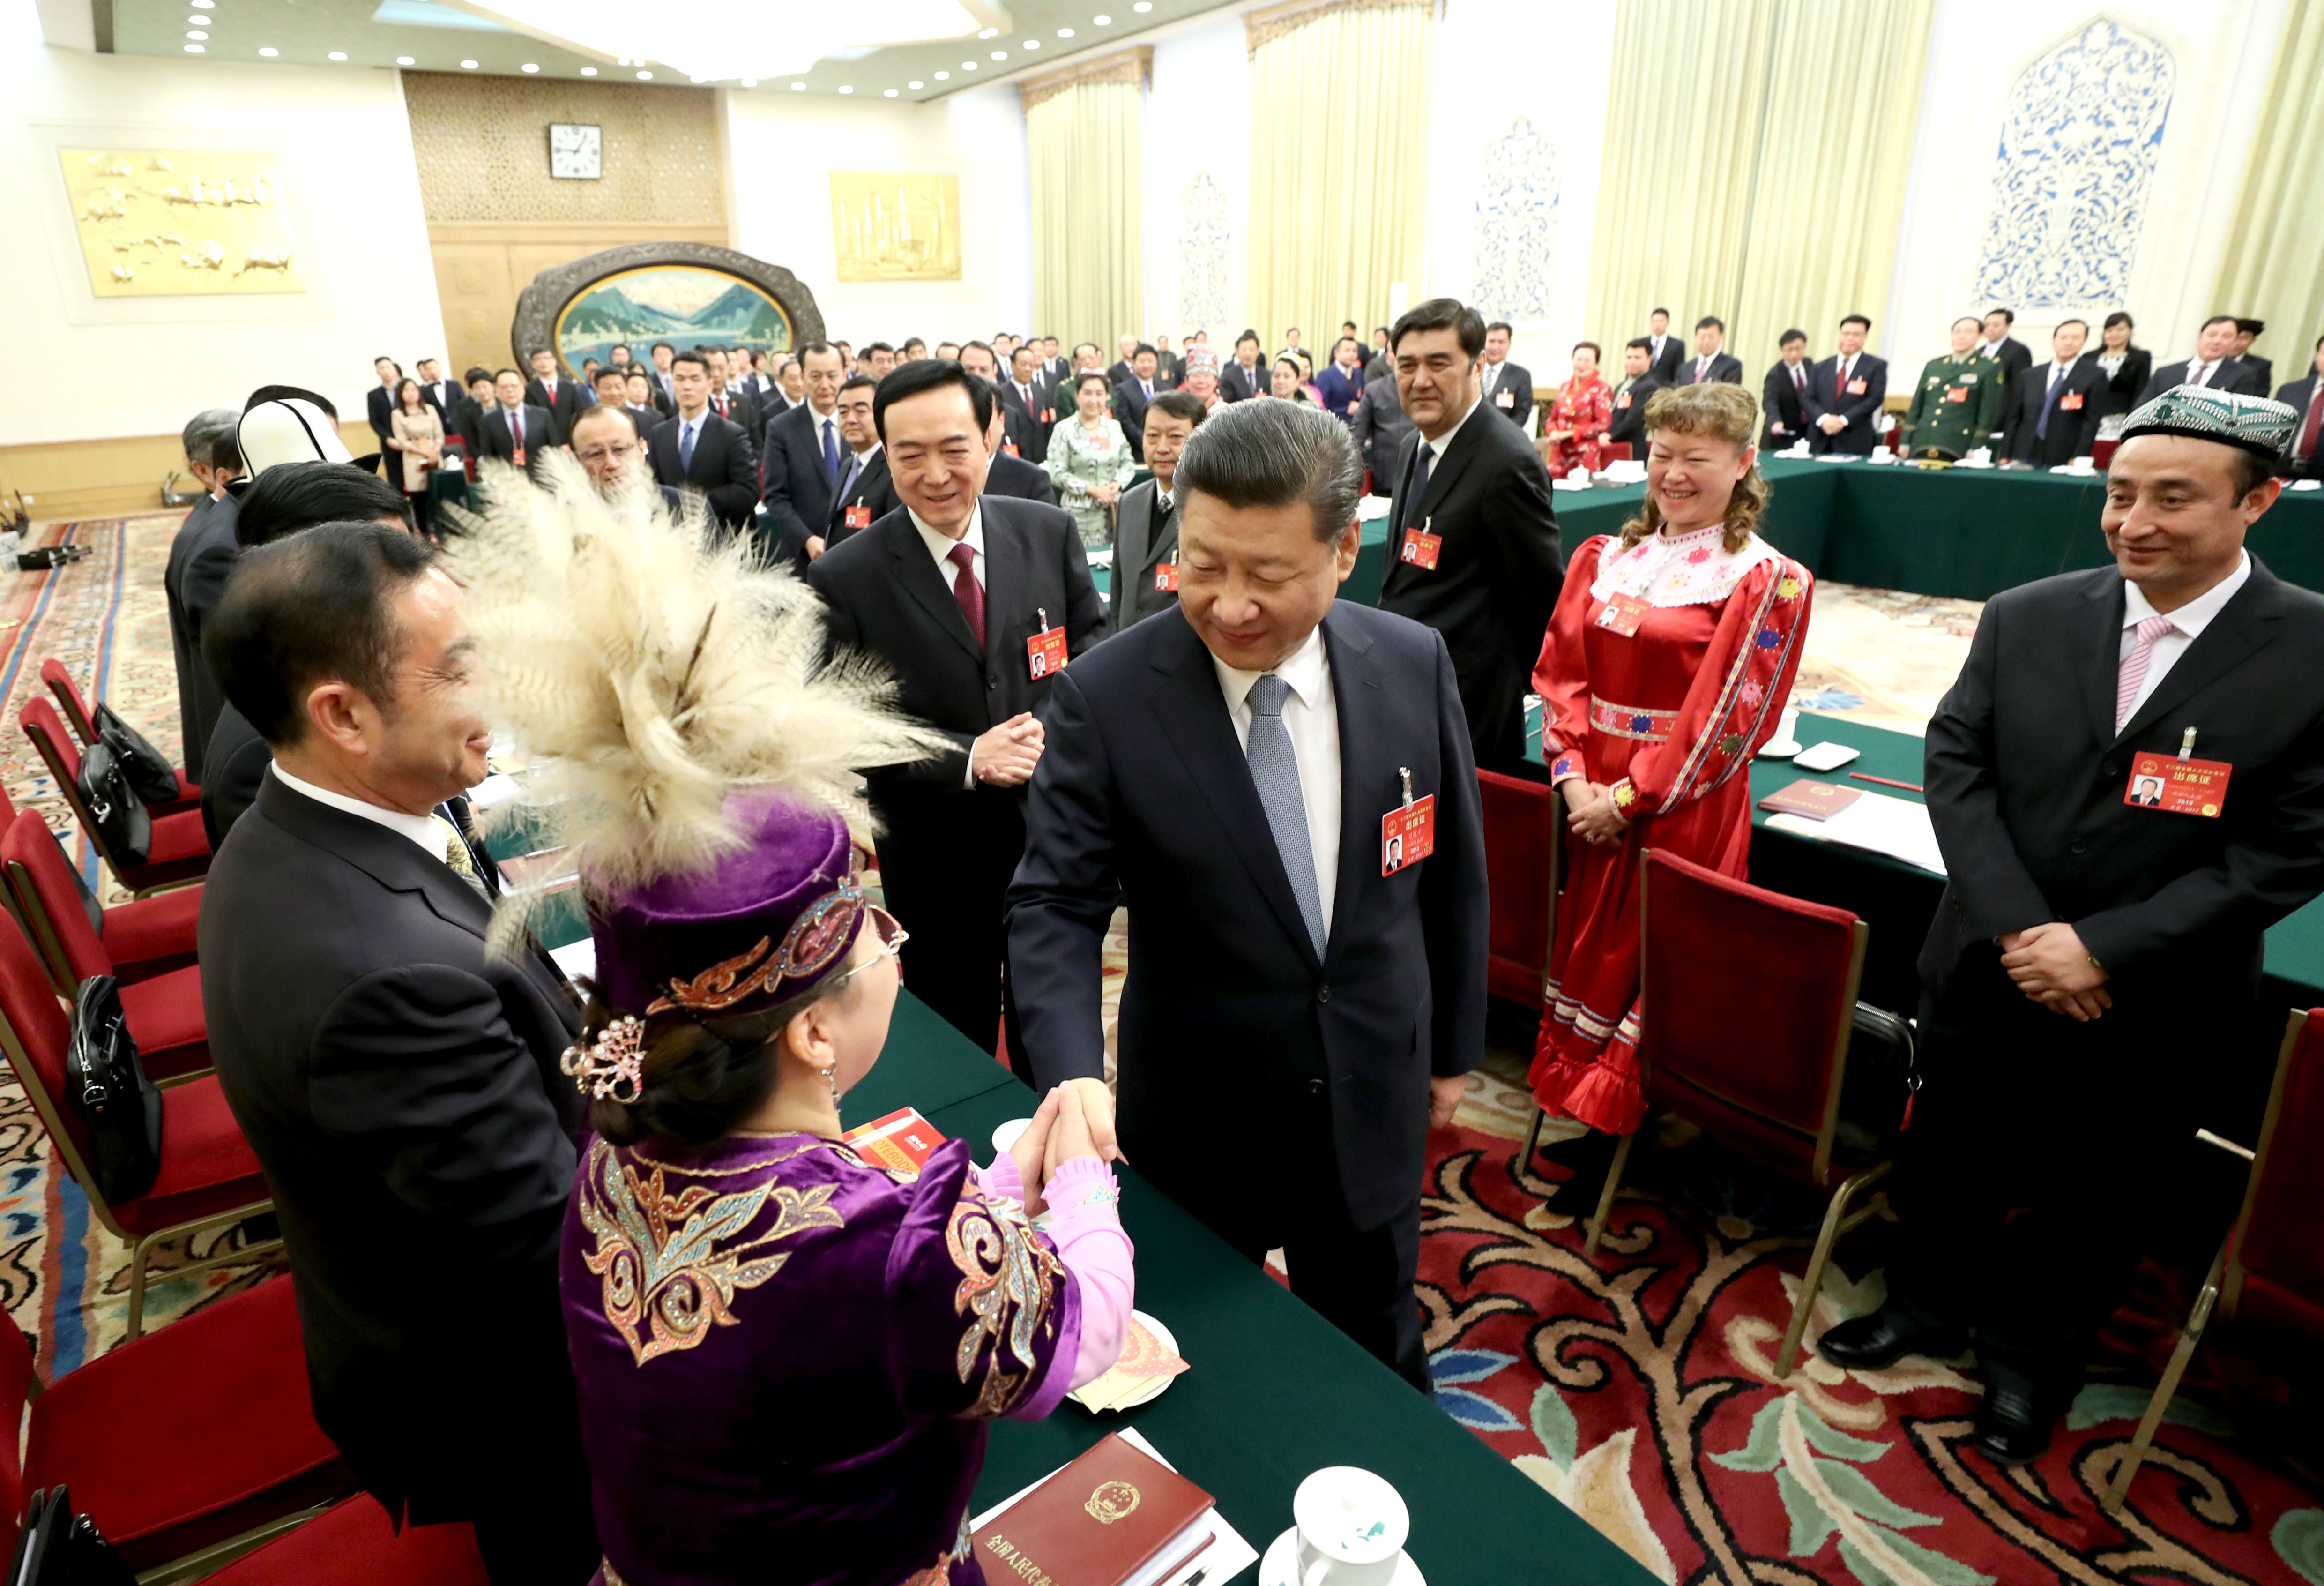 Chinese President Xi Jinping shakes hands with a national lawmaker from Xinjiang during a panel discussion at the ongoing annual session of the National People's Congress. [Photo: Xinhua/Lan Hongguang, Li Tao and Ma Zhancheng]